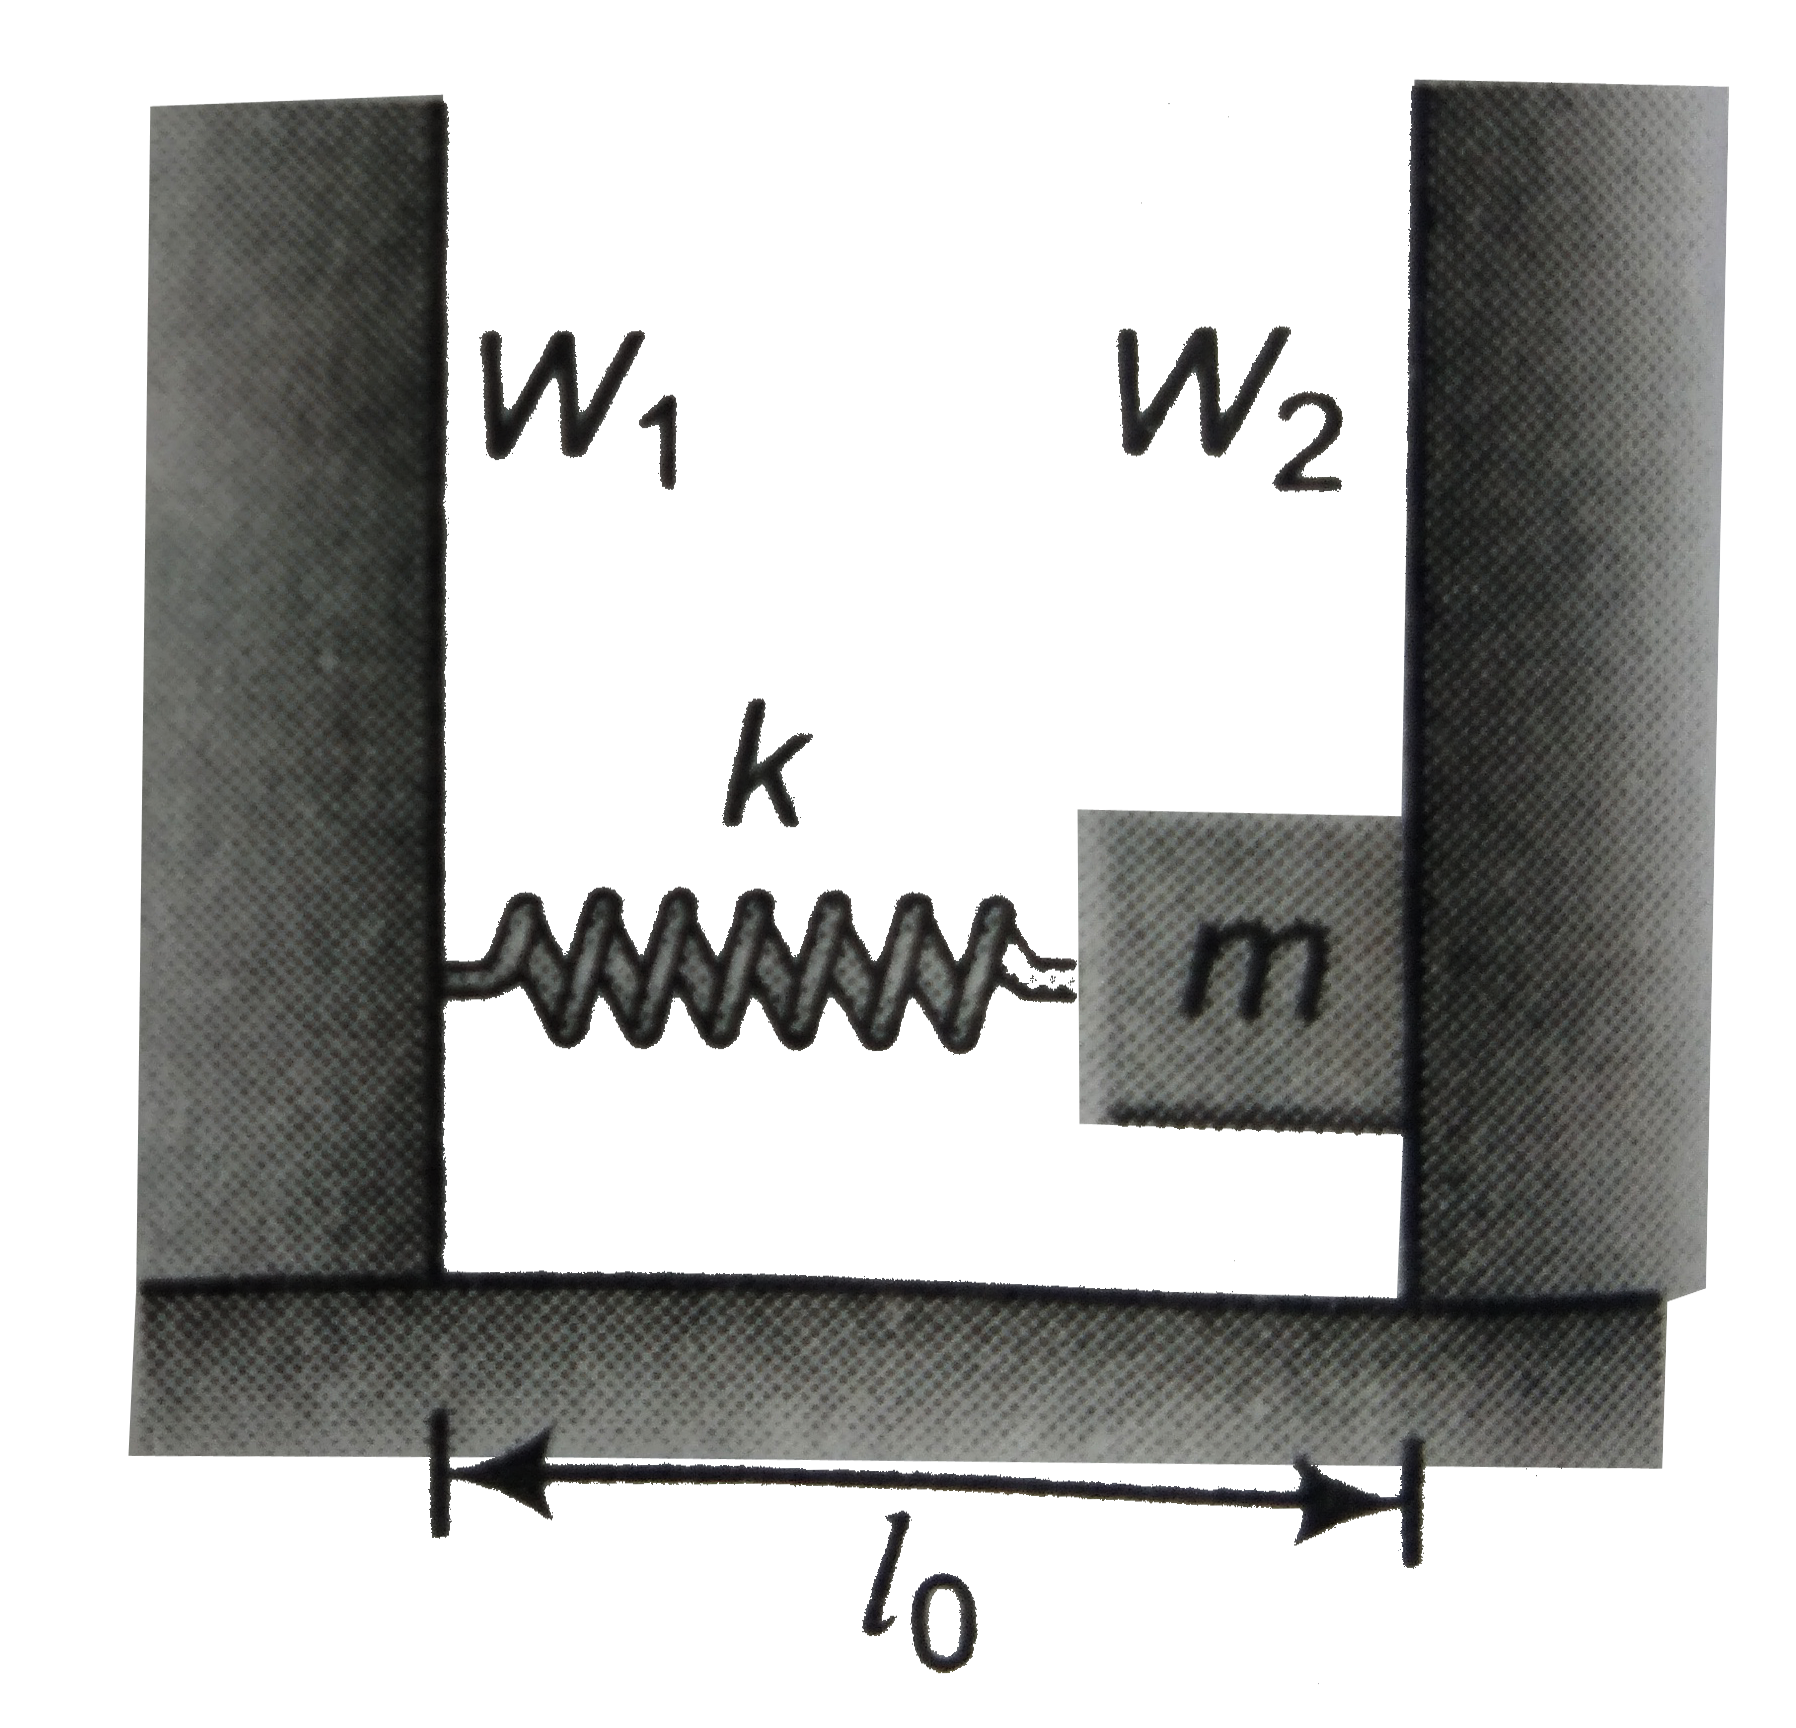 In the figure shown, a spring mass system is placed on a horizontal smooth surface in between two vertical rigid walls W(1) and W(2). One end of spring is fixed with wall W(1) and other end is attached with mass m which is free to move. Initially, spring is tension free and having natural length l(0). Mass m is compressed through a distance a and released. Taking the collision between wall W(2) and mass m as elastic and K as spring constant, the average force exerted by mass m on wall W(2) in one oscillation of block is